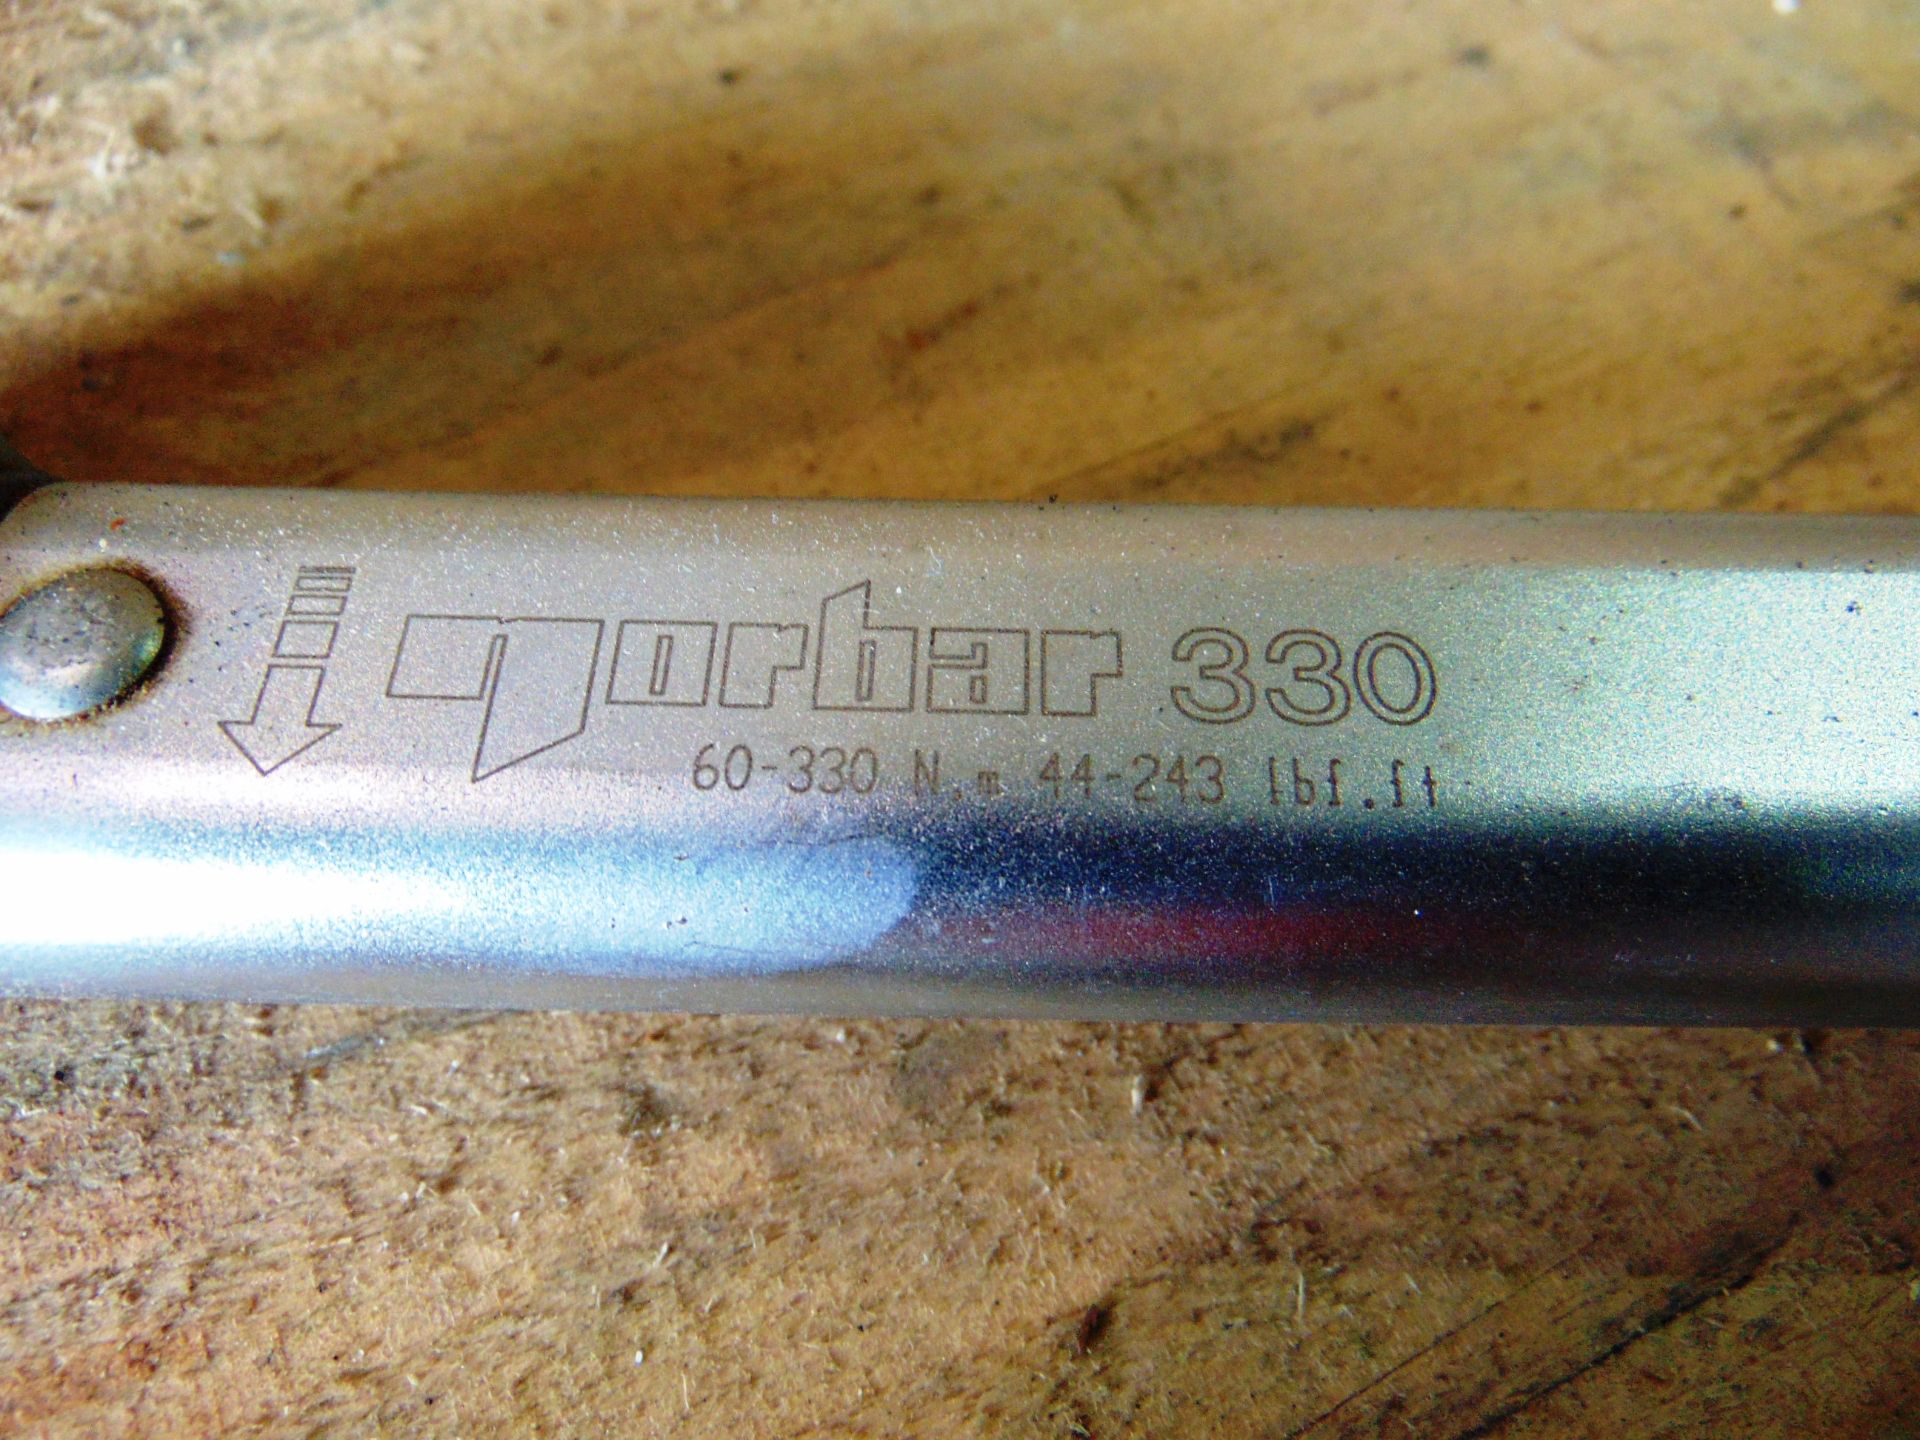 Norbar 330 Torque Wrench 1/2" Drive 60-330nm - Image 3 of 5